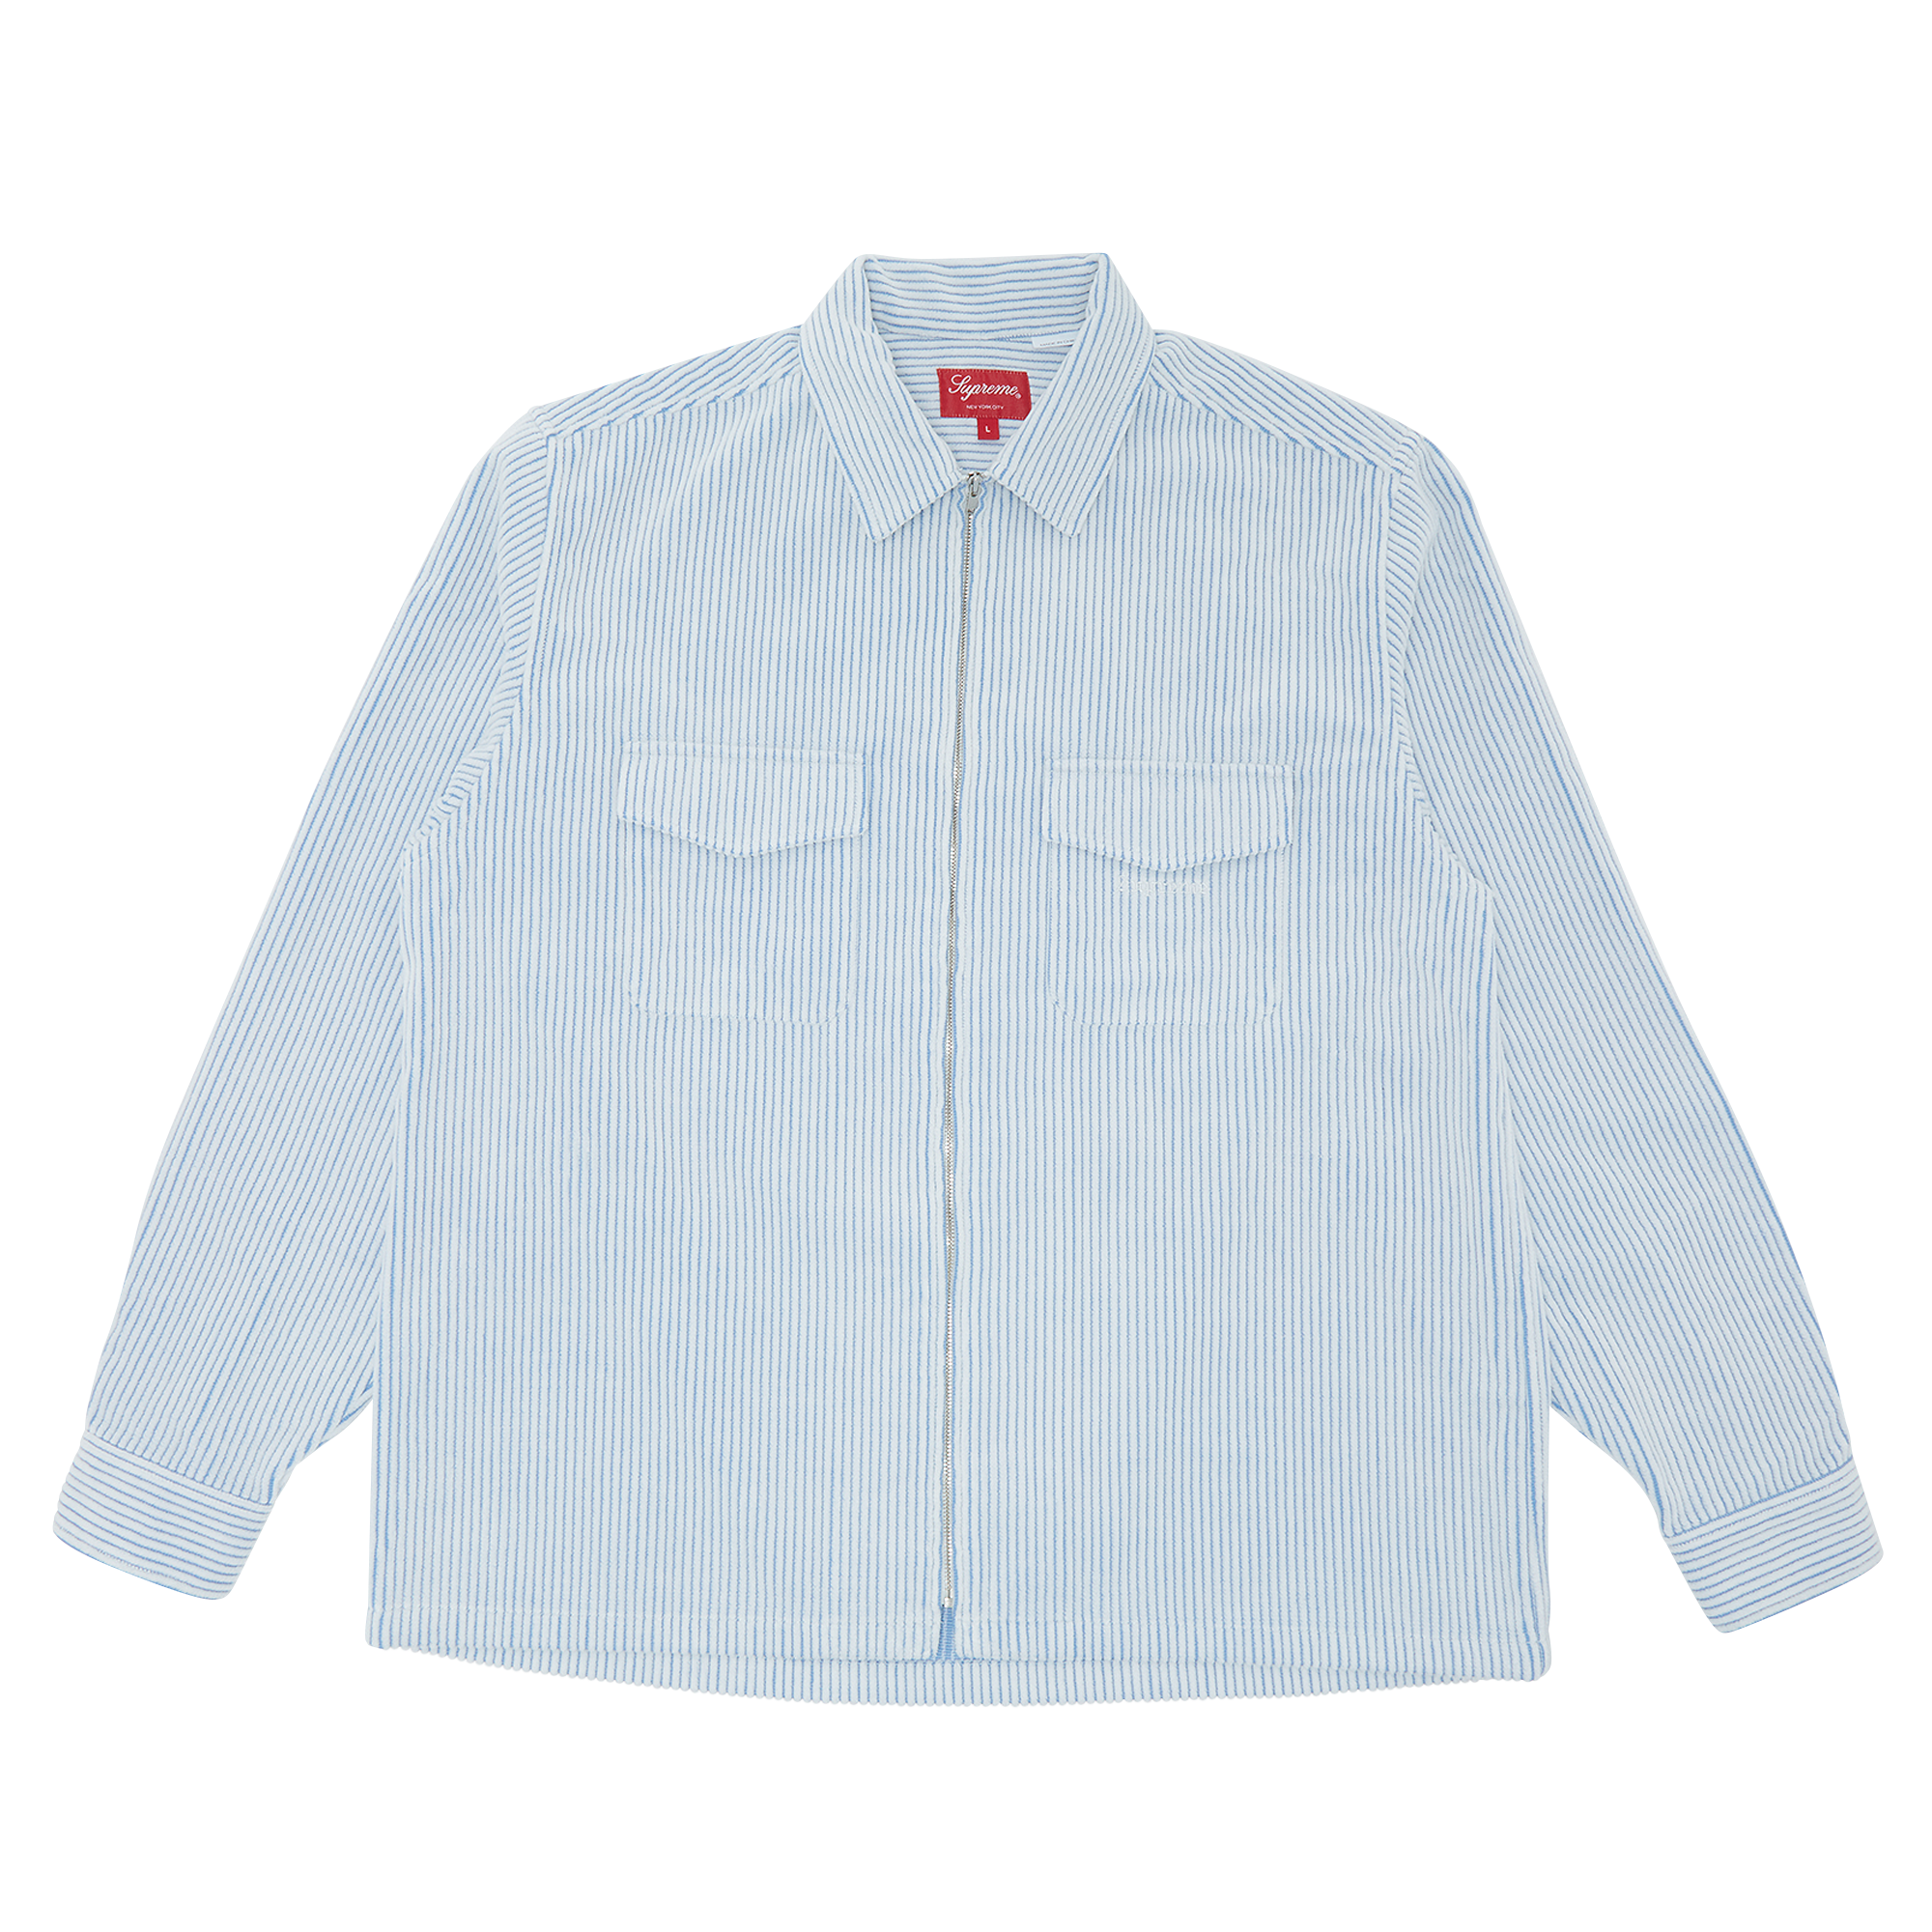 S/S19 Supreme Oxford Button Up Shirt  Button up shirts, Supreme shirt, Button  up